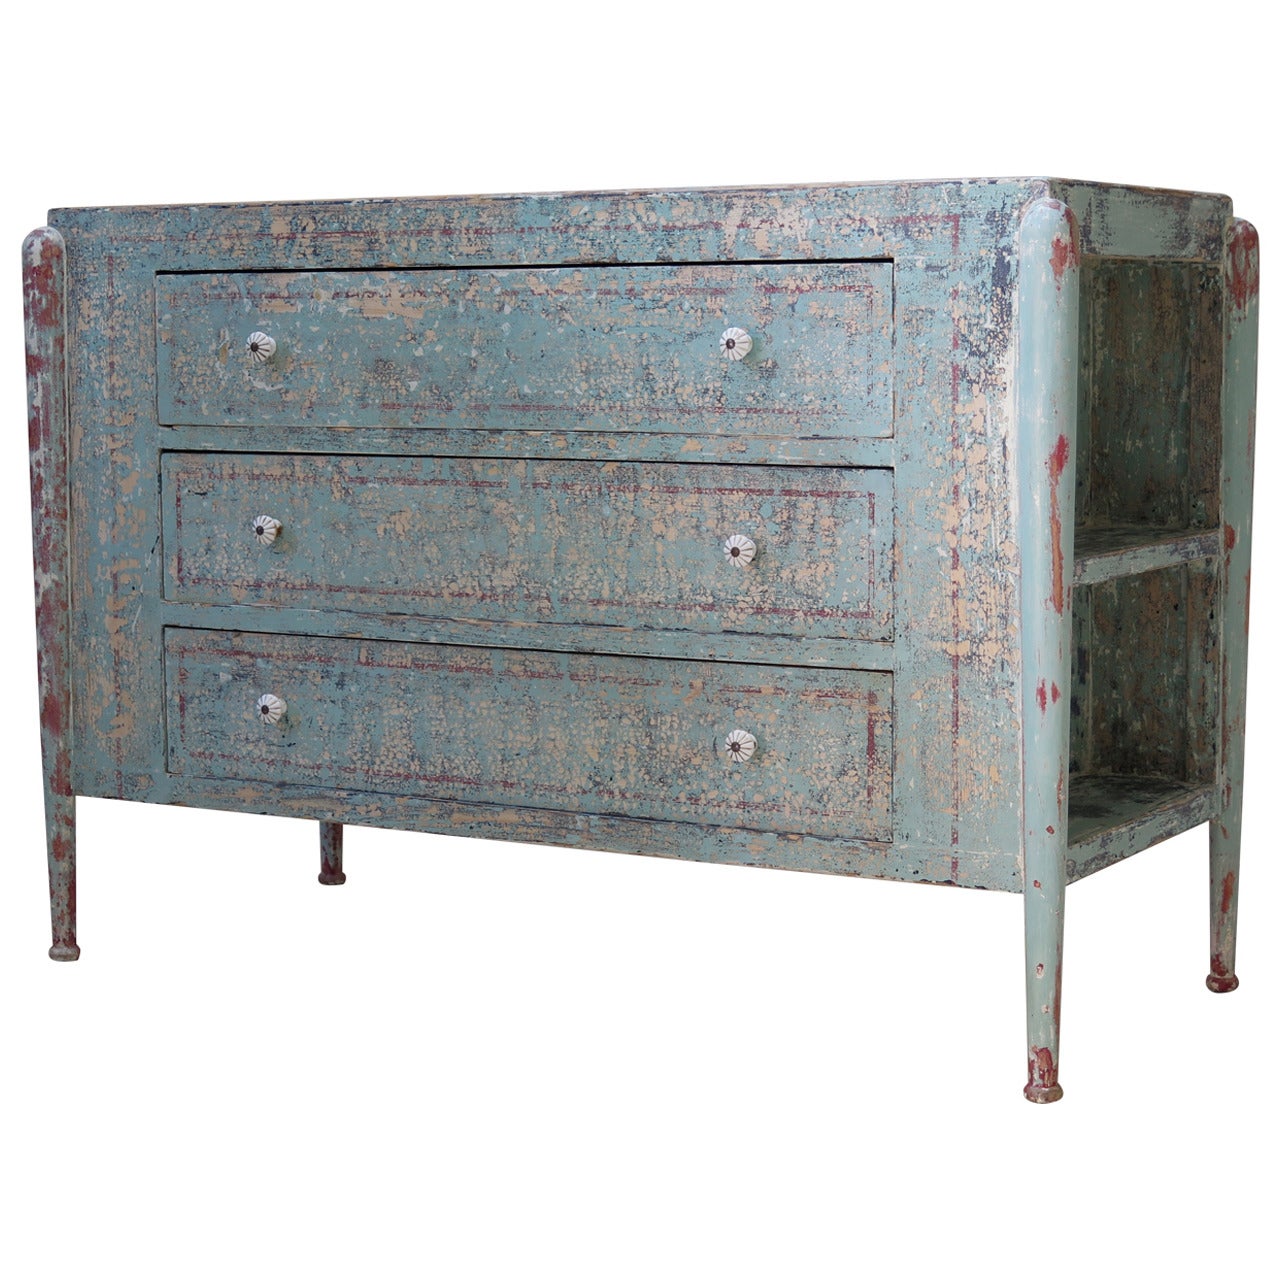 Unusual Painted Chest of Drawers with Side Shelves, France, 1920s